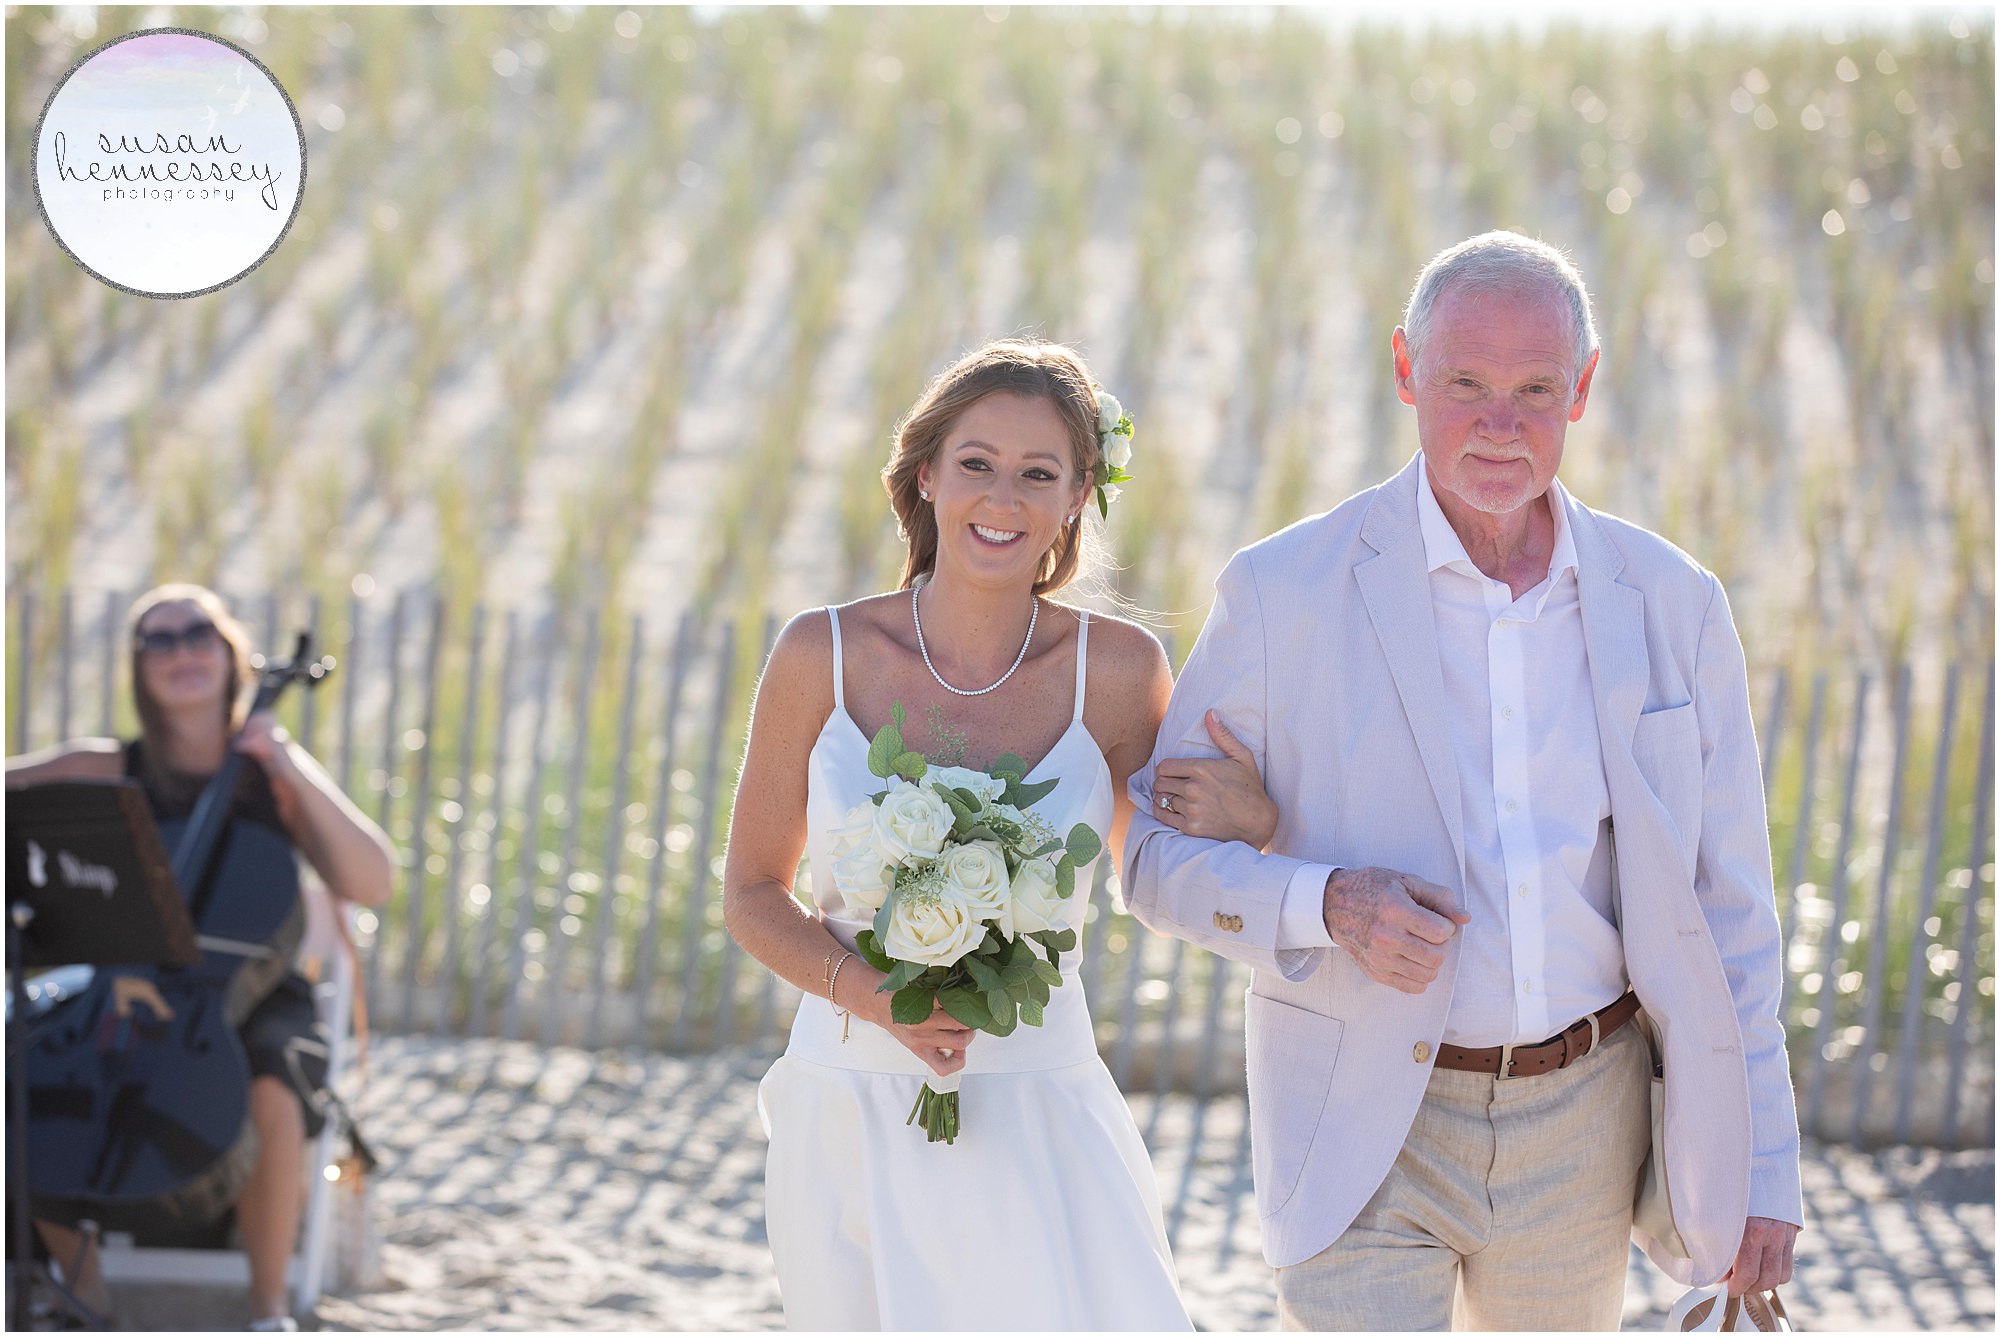 Father walks bride down aisle at Jersey Shore microwedding